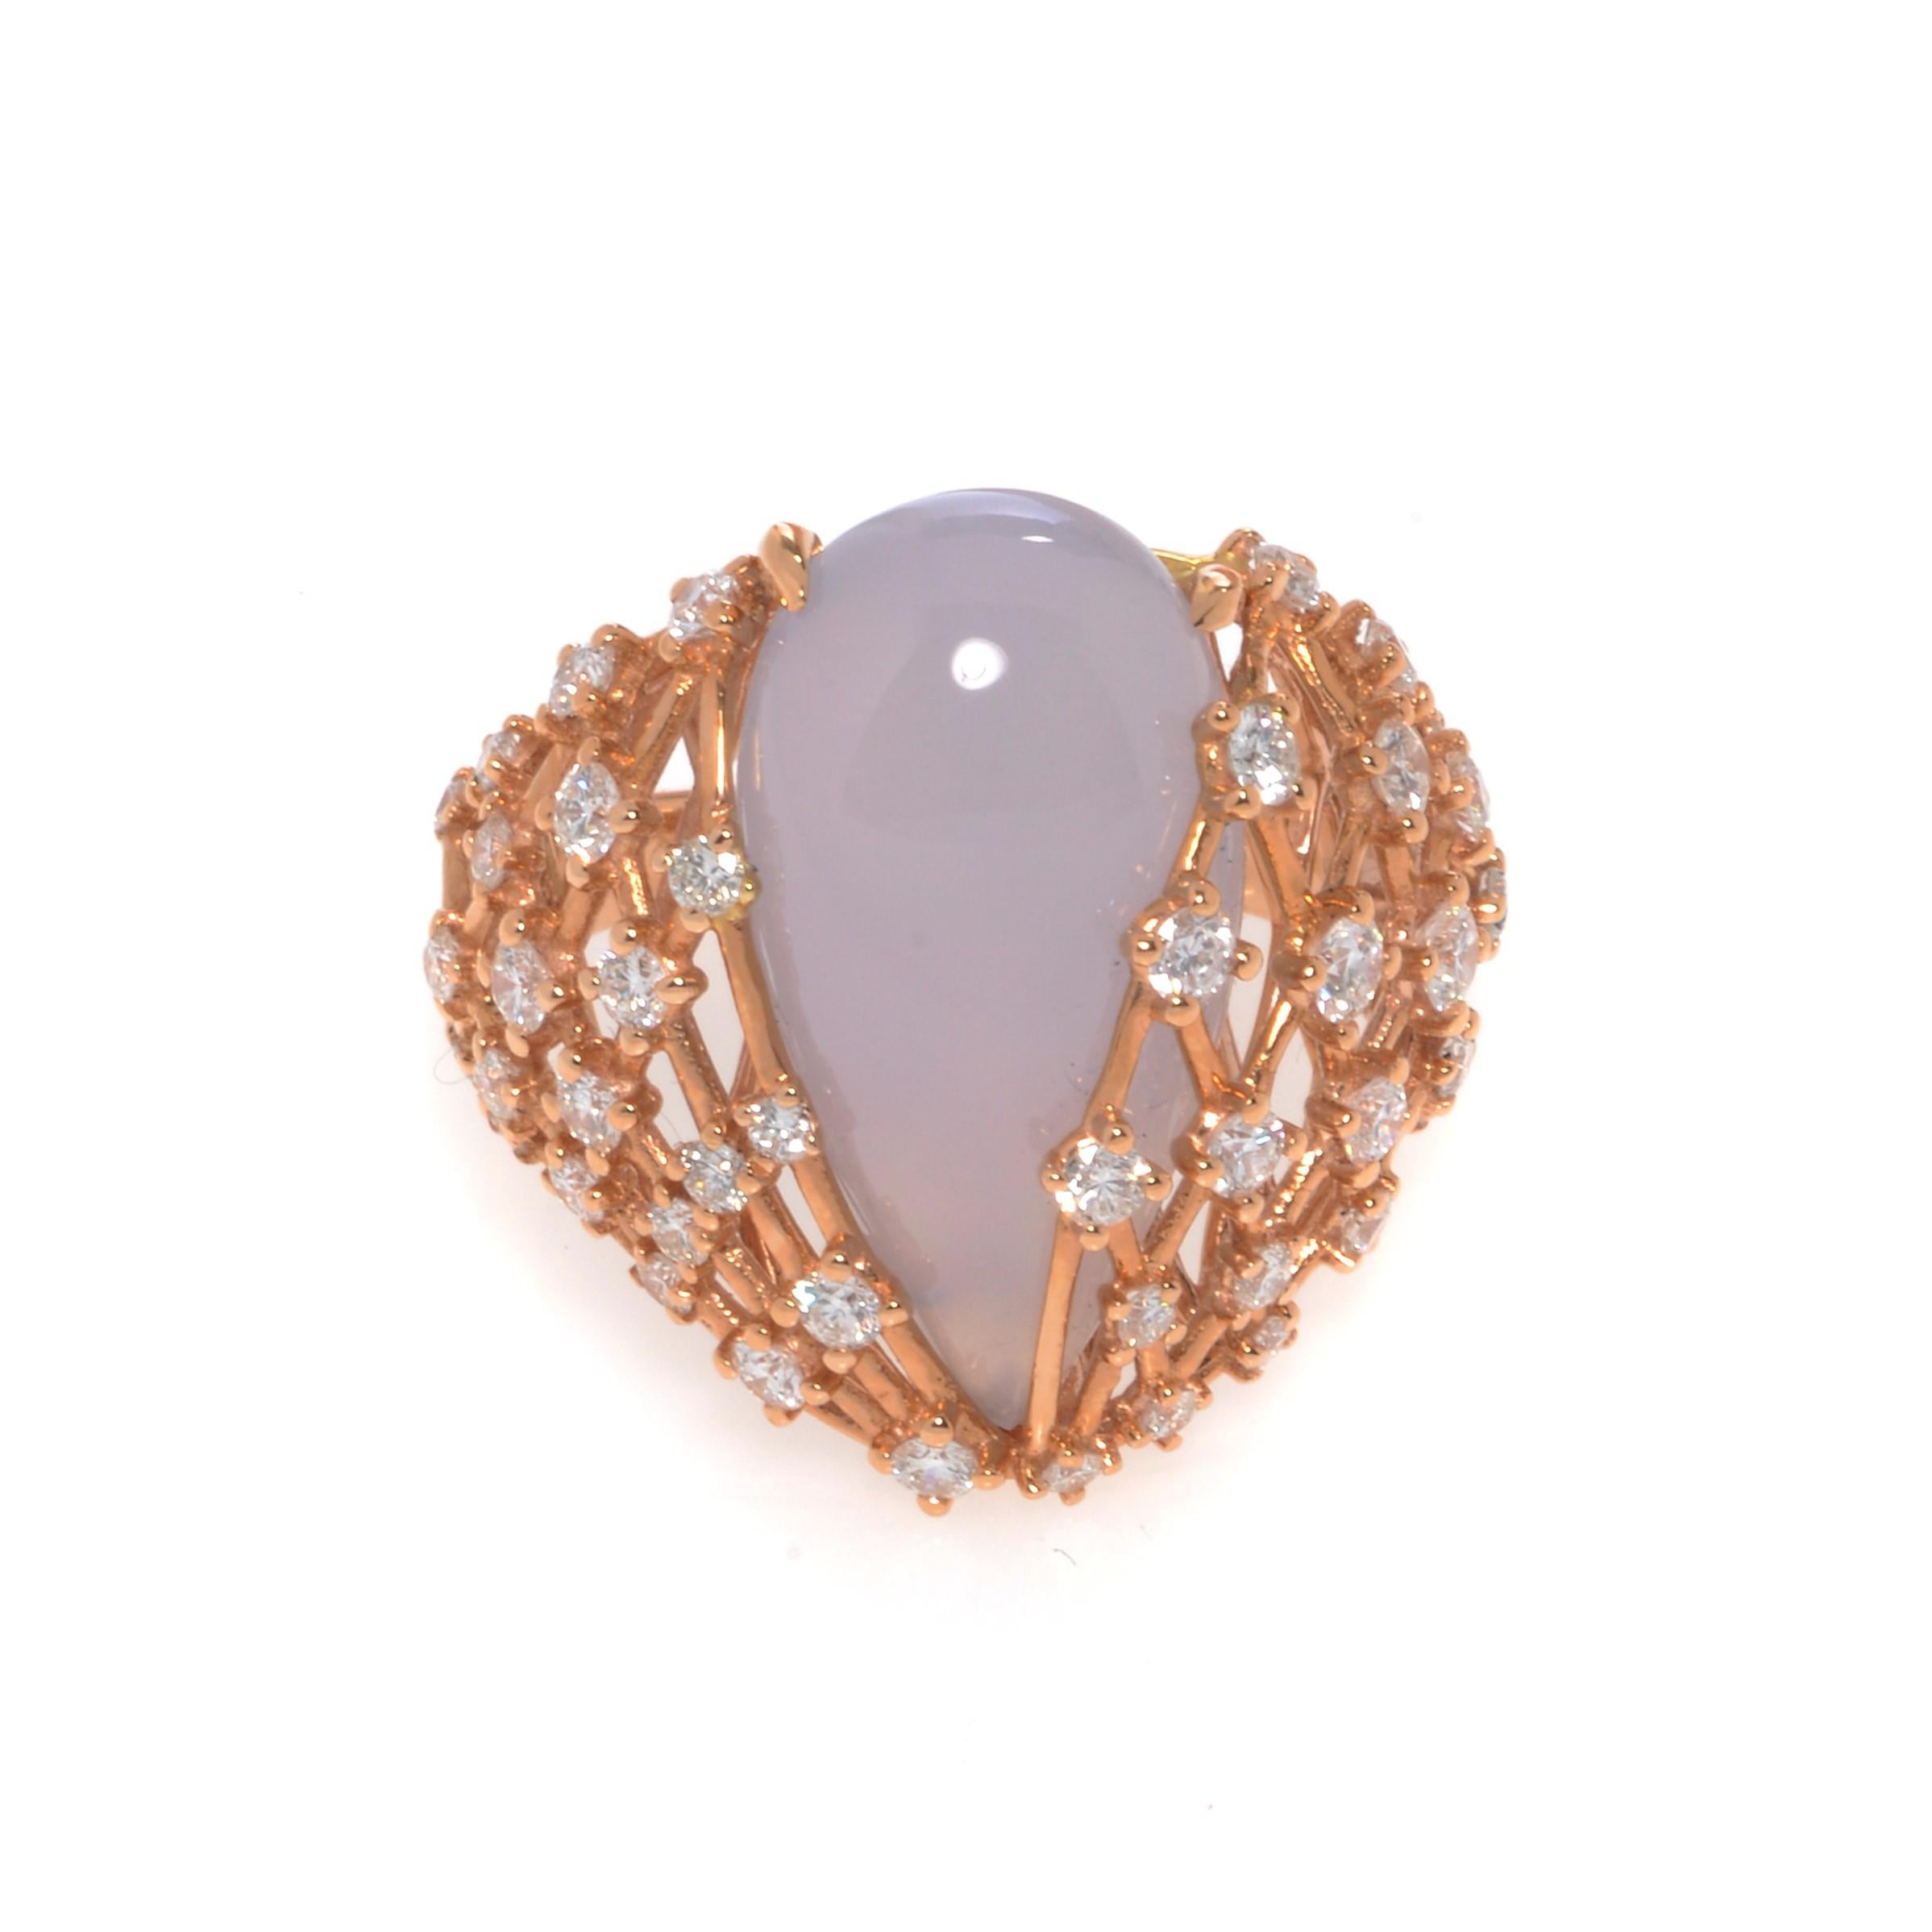 This beautiful cocktail ring features a large natural pear shape Chalcedony in 18k yellow gold setting. Set with 1.25cttw of brilliant cut diamonds. Diamond color G and VVS clarity. Chalcedony weights 1.90 grams. Ring size 7.5. Top measurements: